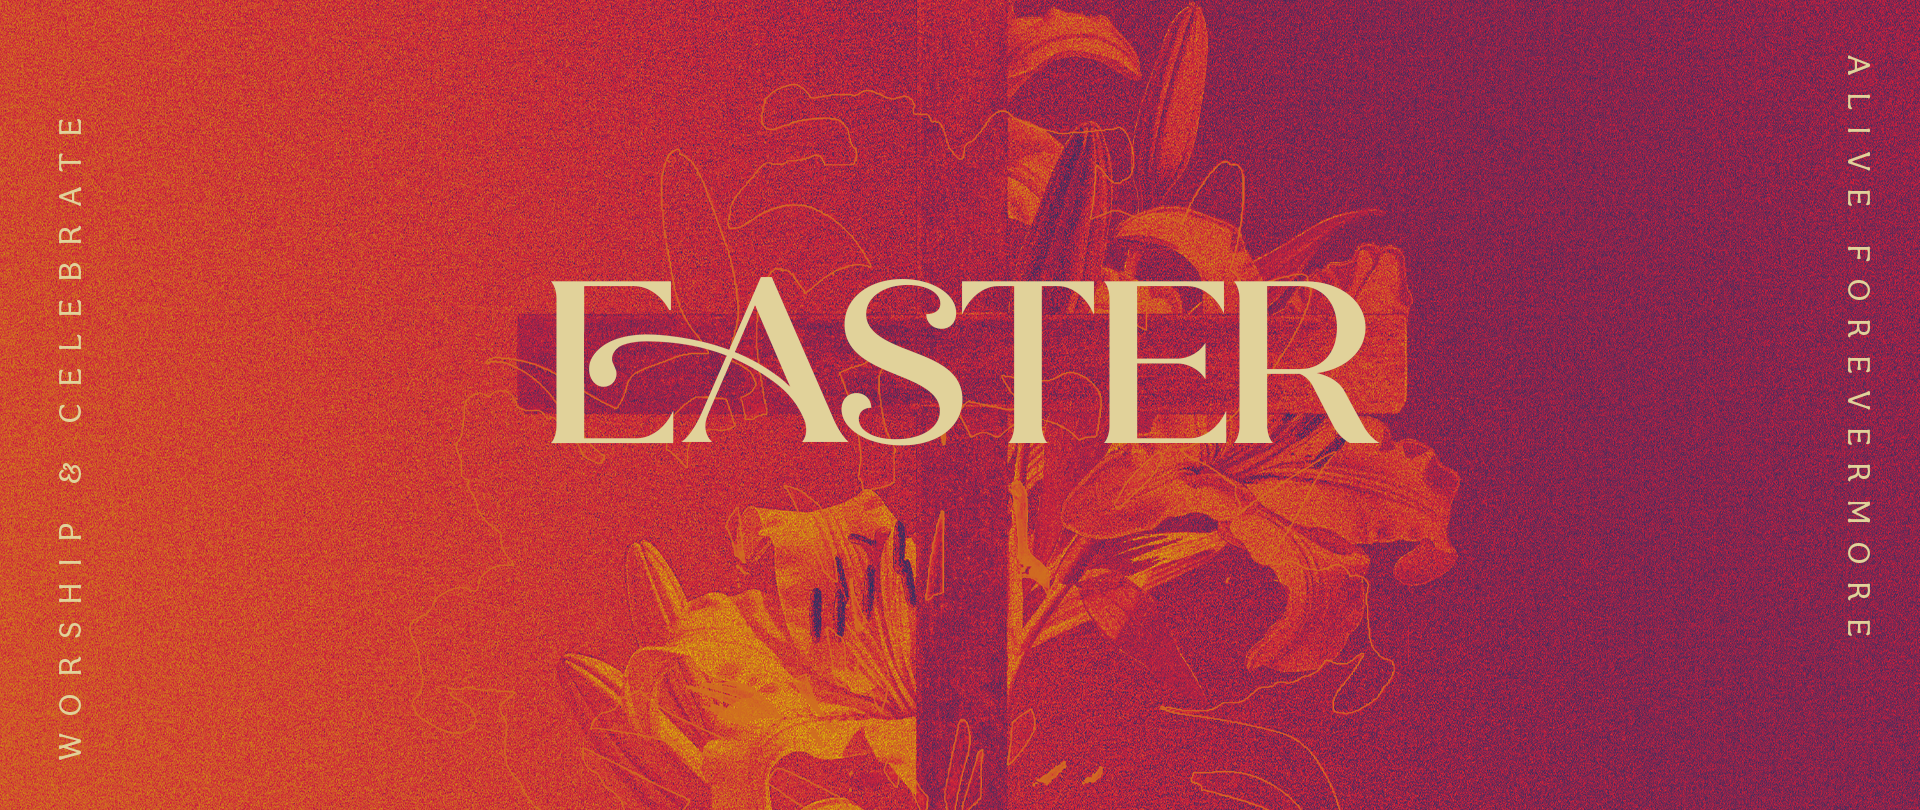 CELEBRATE EASTER
Sunday, March 31
9:00 & 11:00 AM
